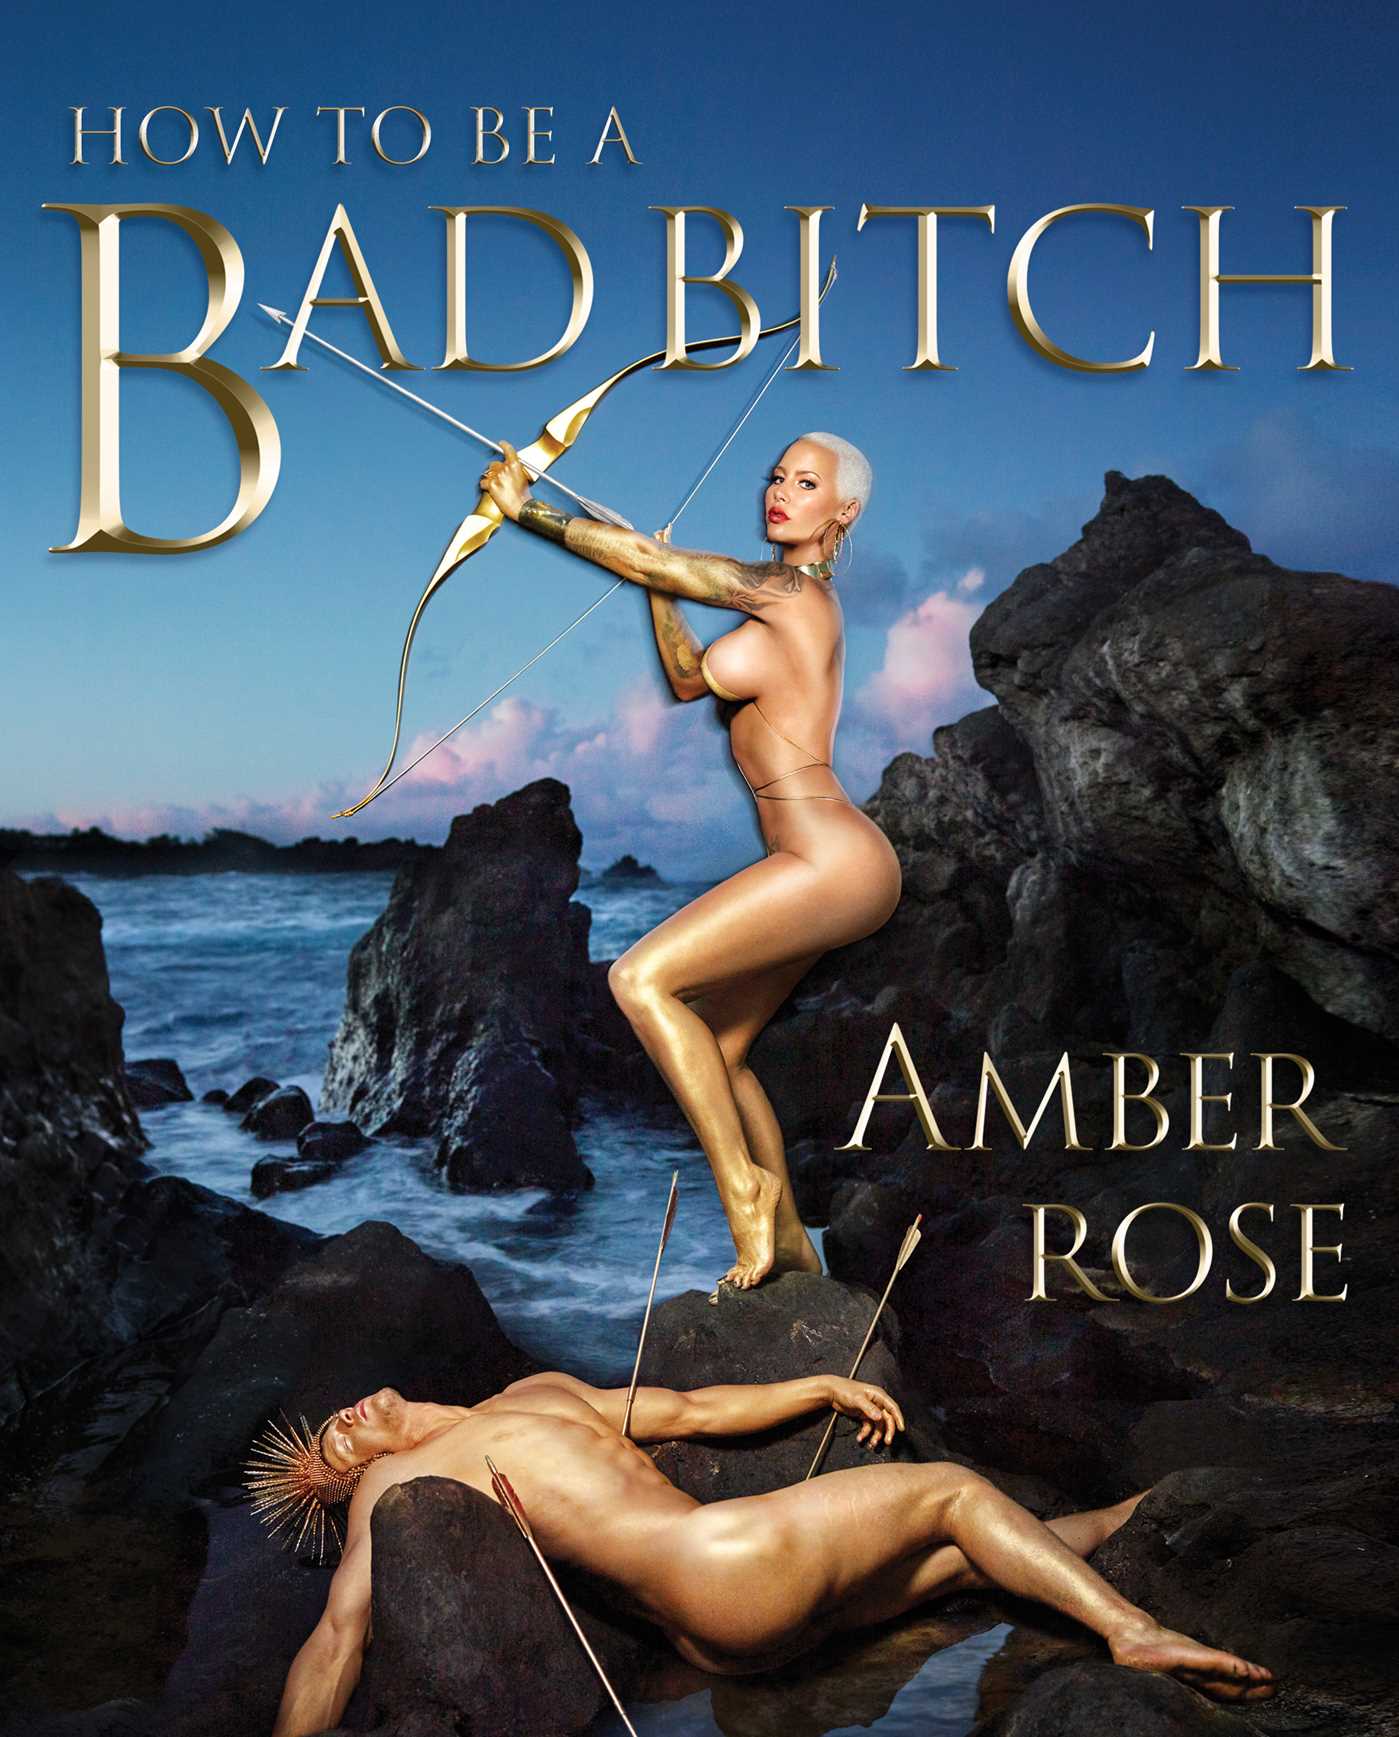 How to Be a Bad Bitch by Amber Rose